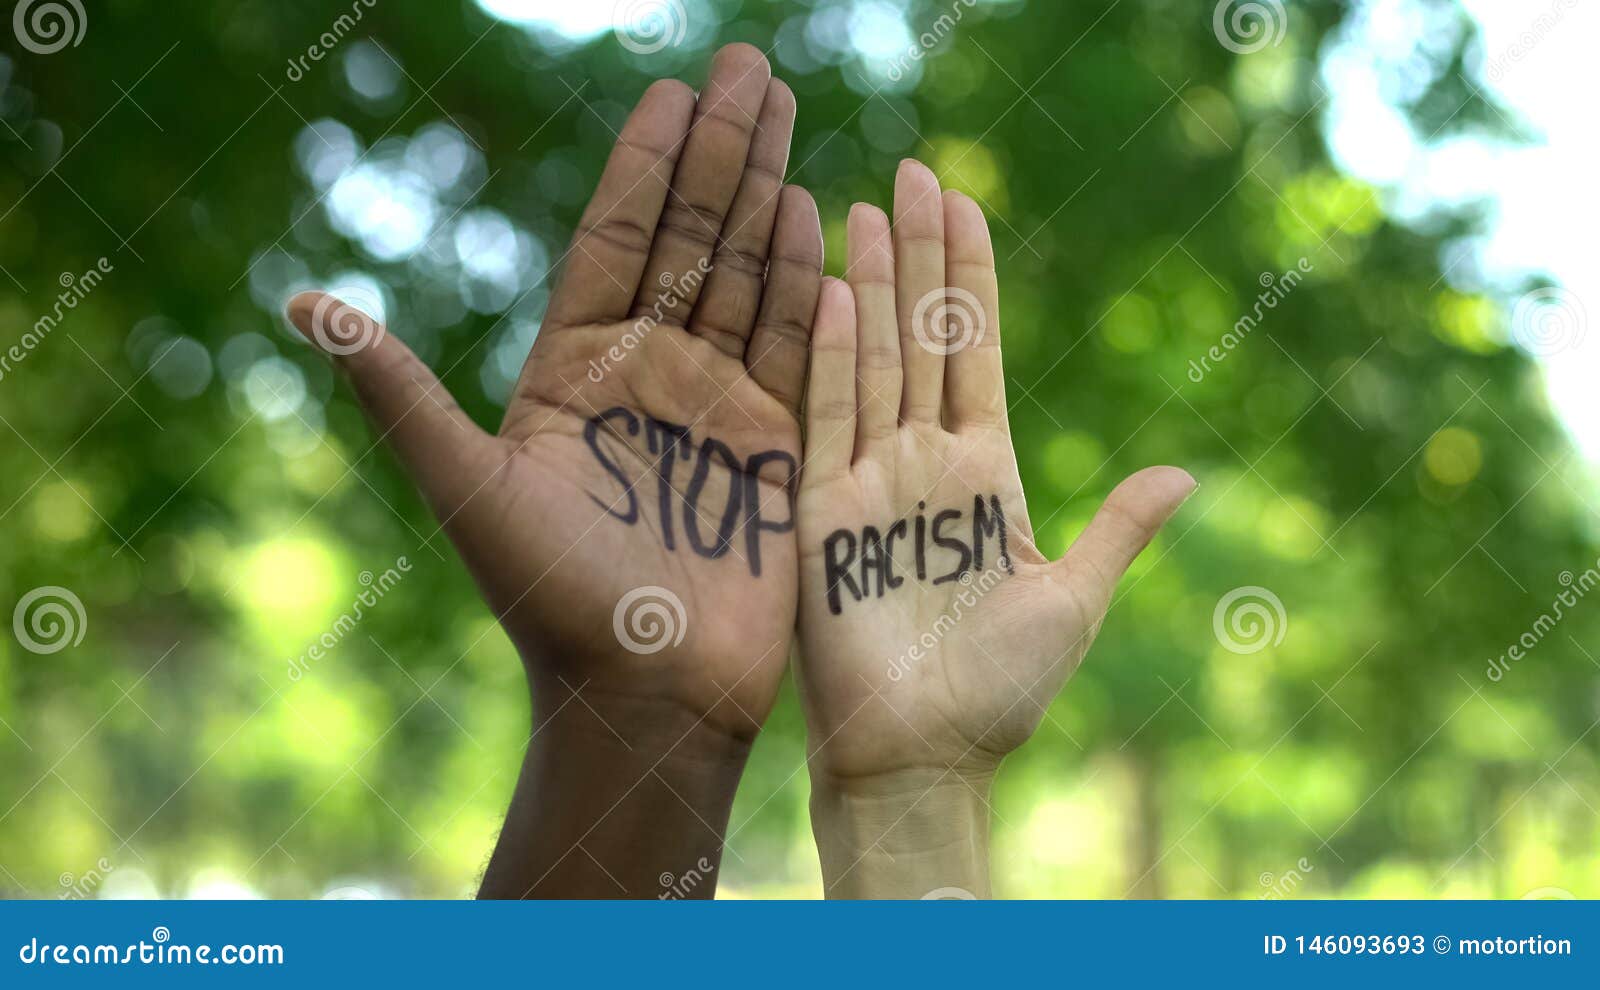 Racism Warning Road Sign Stock Photo 13876638